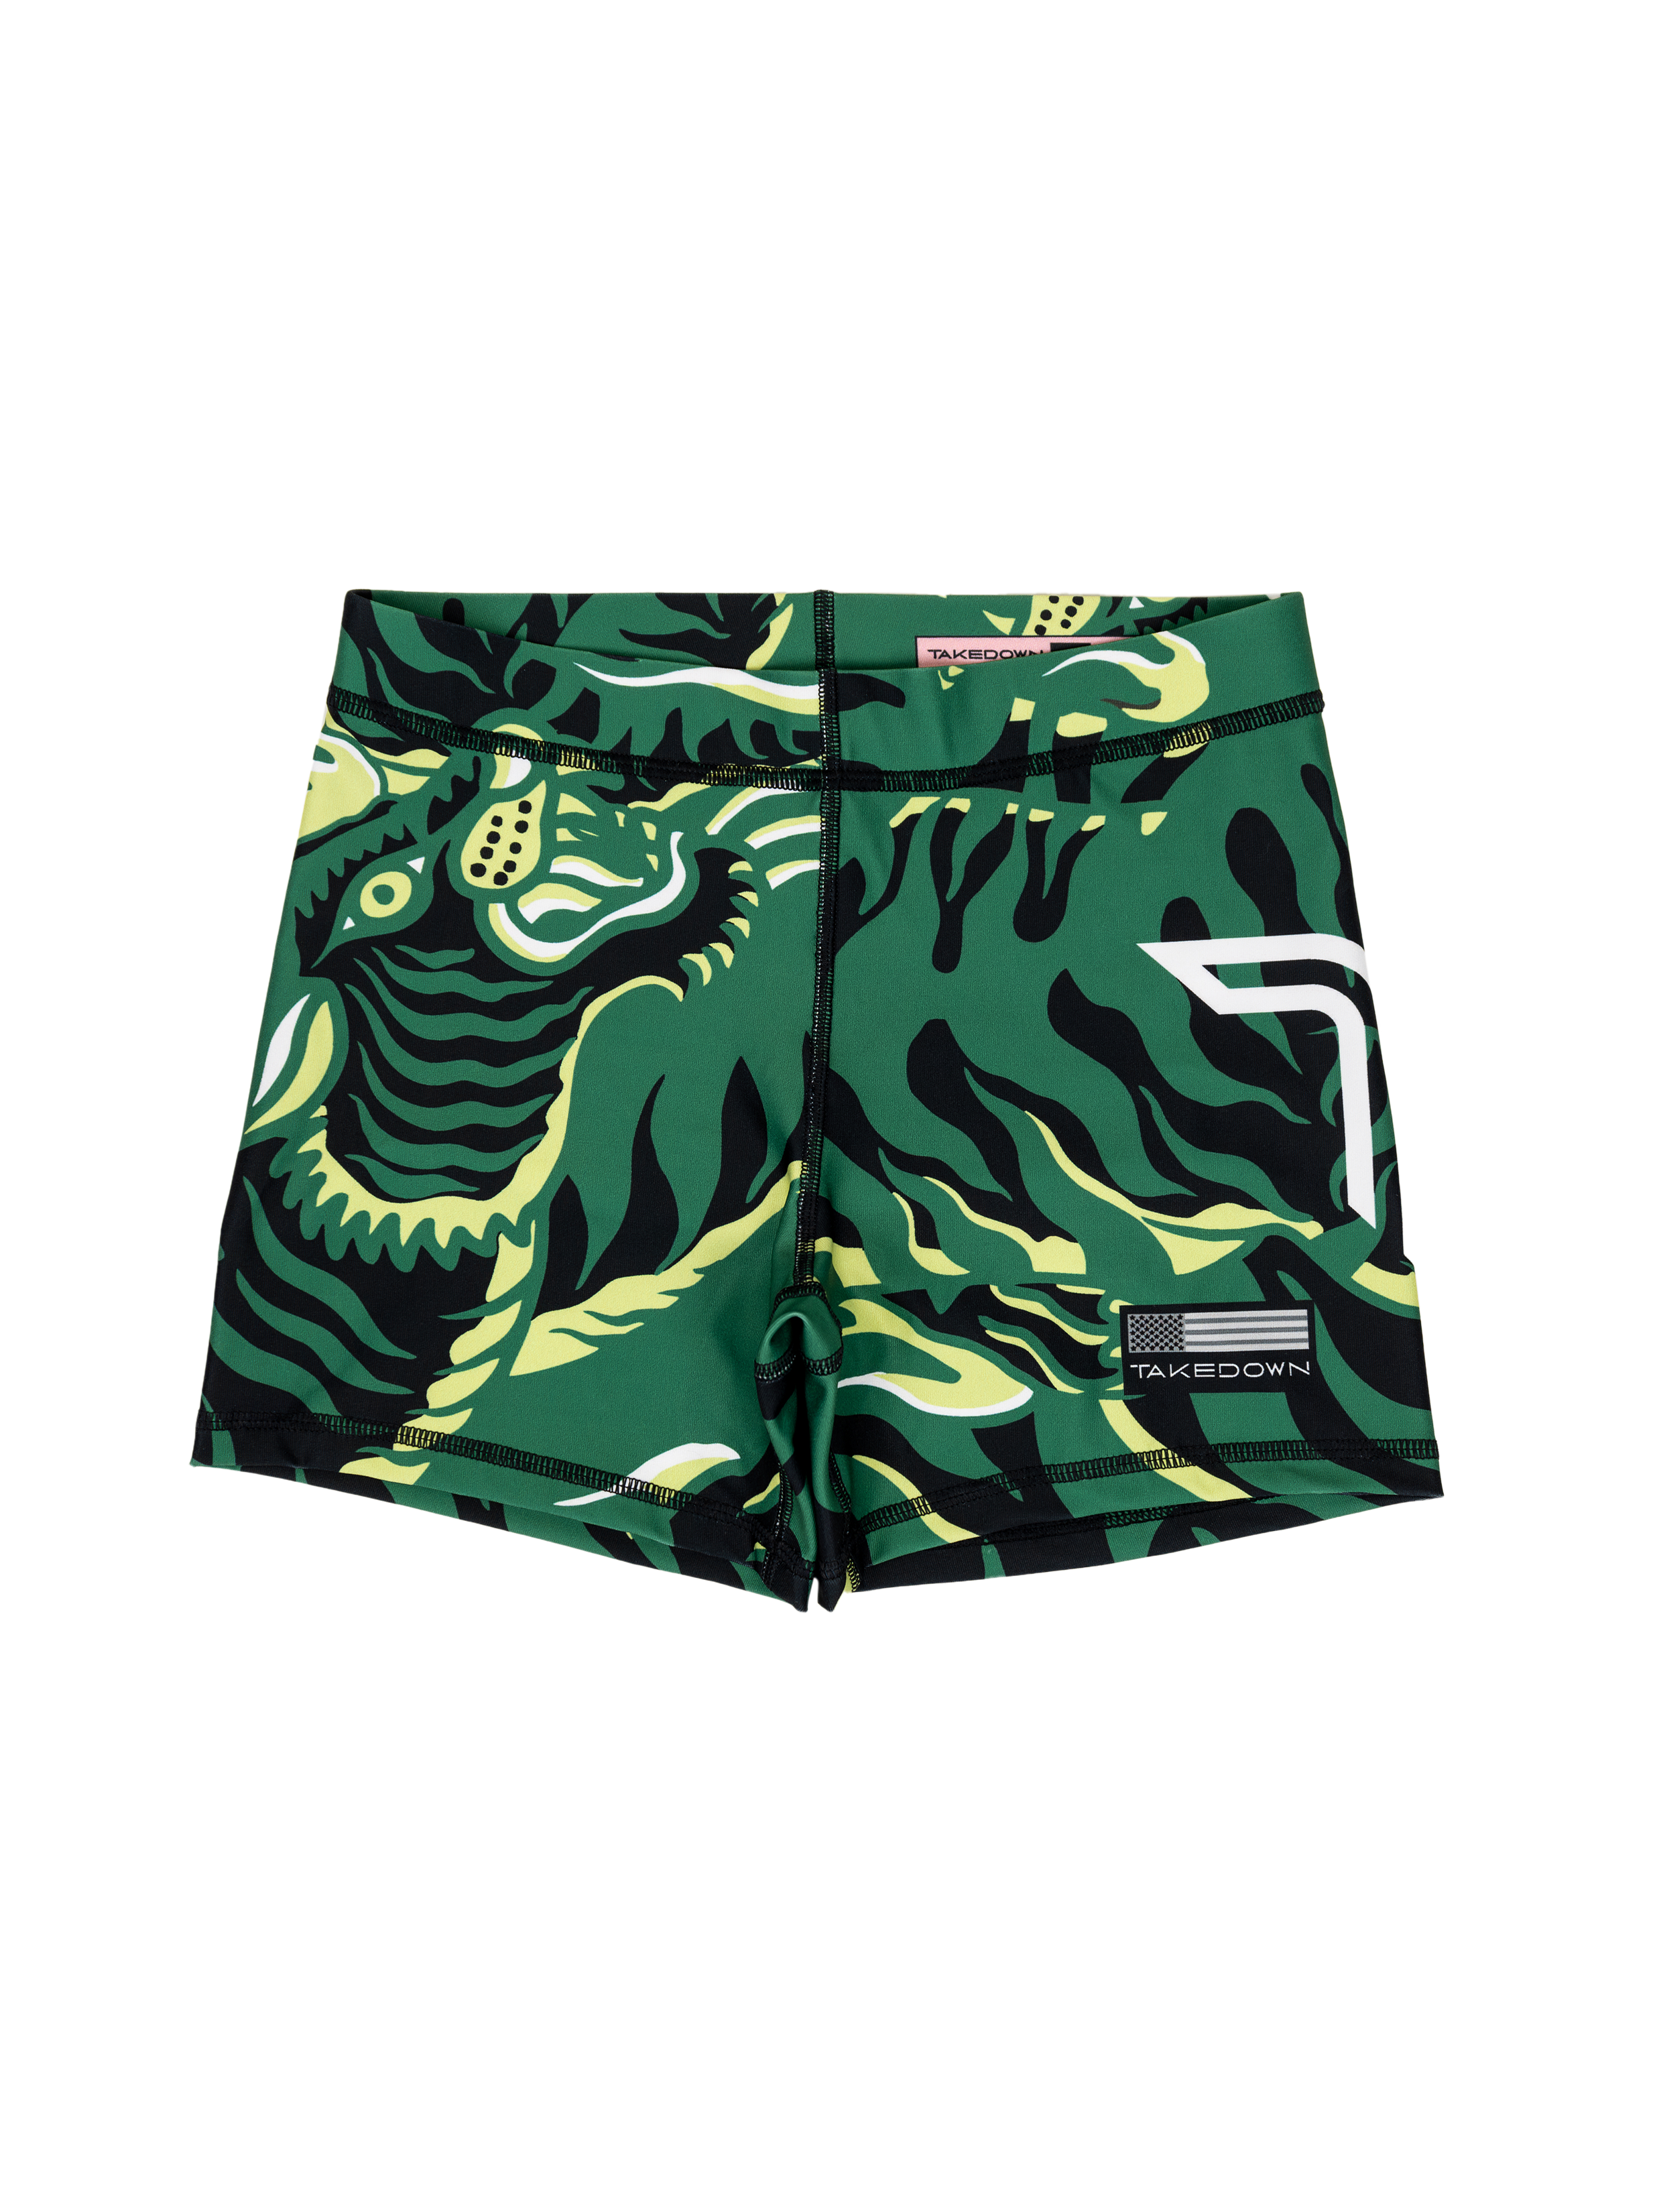 'Tiger Fight' Women's Compression Shorts - Bamboo Green (4